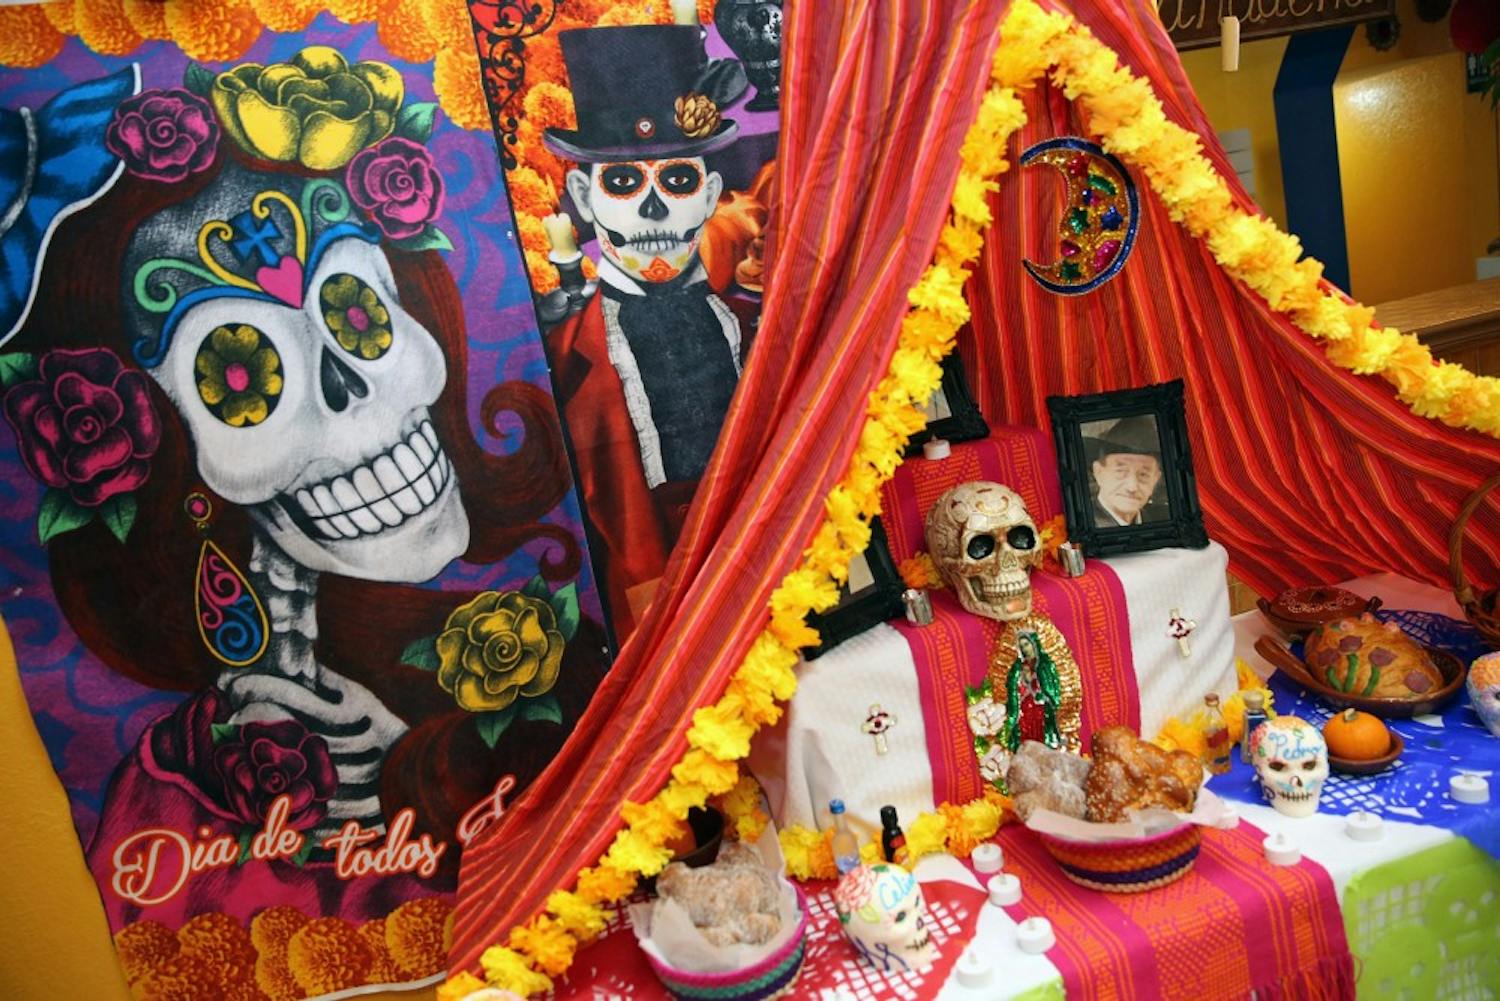 A Shrine of 'Dia de Muertos' at Mi Riconcito Mexican Bakery on Calle Ocho in Little Havana on Nov. 1, 2016. The Day of the Dead is a longstanding Mexican holiday that combines traditional native beliefs with traditional Spanish Catholic beliefs. The Day of the Dead celebrate dead family members through a series of events that take place on Nov. 1st and 2nd in Mexico and many cultures around the world. (C.M Guerrero/Miami Herald/TNS) 